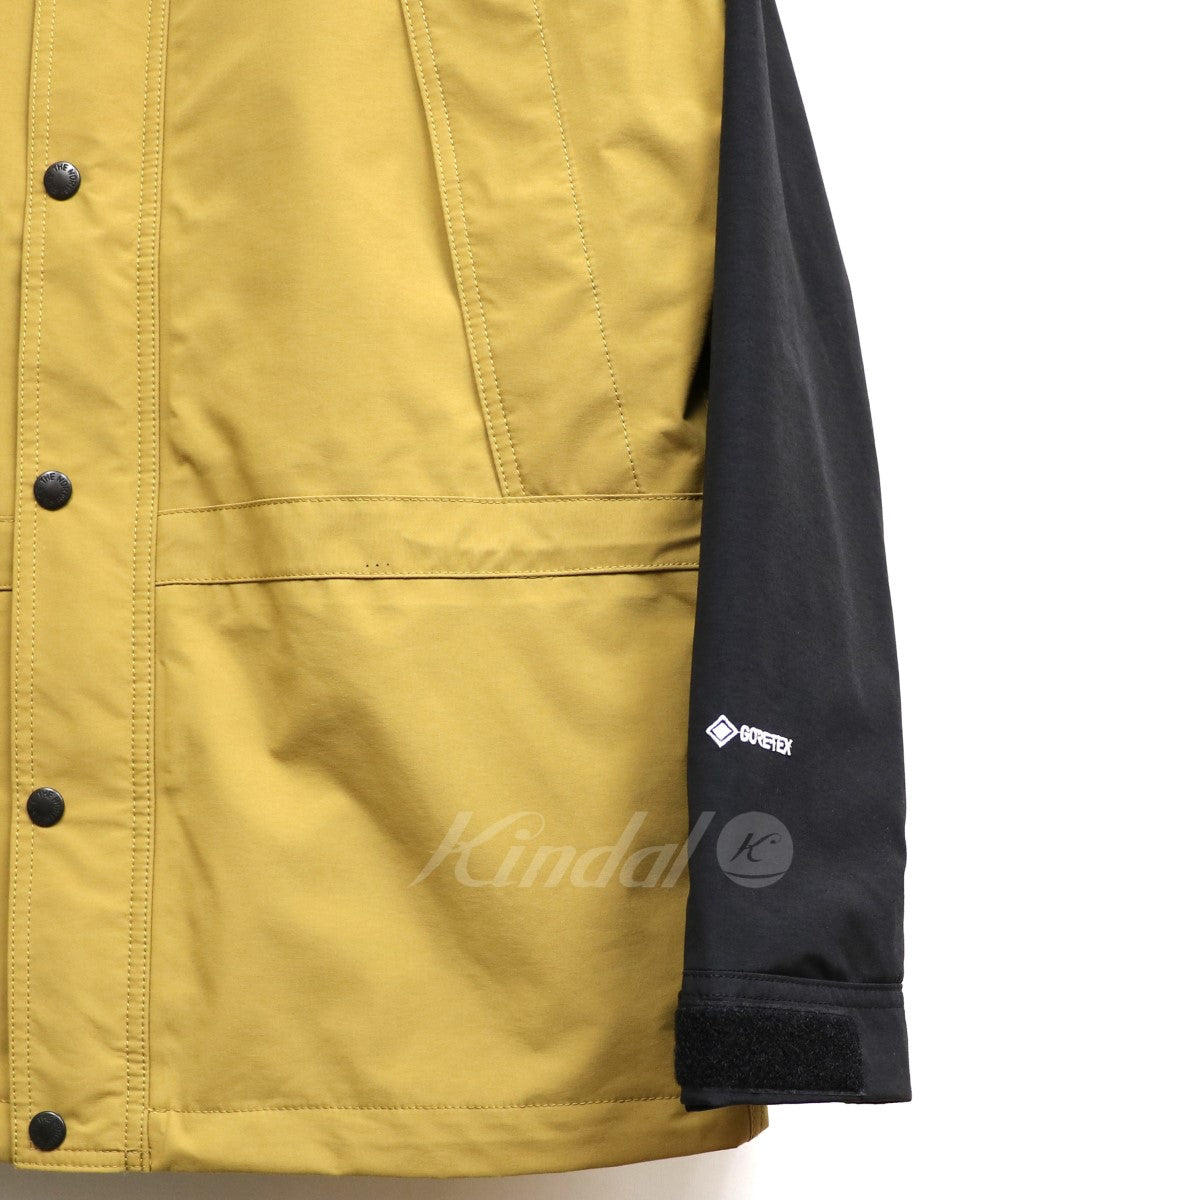 THE NORTH FACE(ザノースフェイス) 19AW Mountain Light Jacket GORE ...